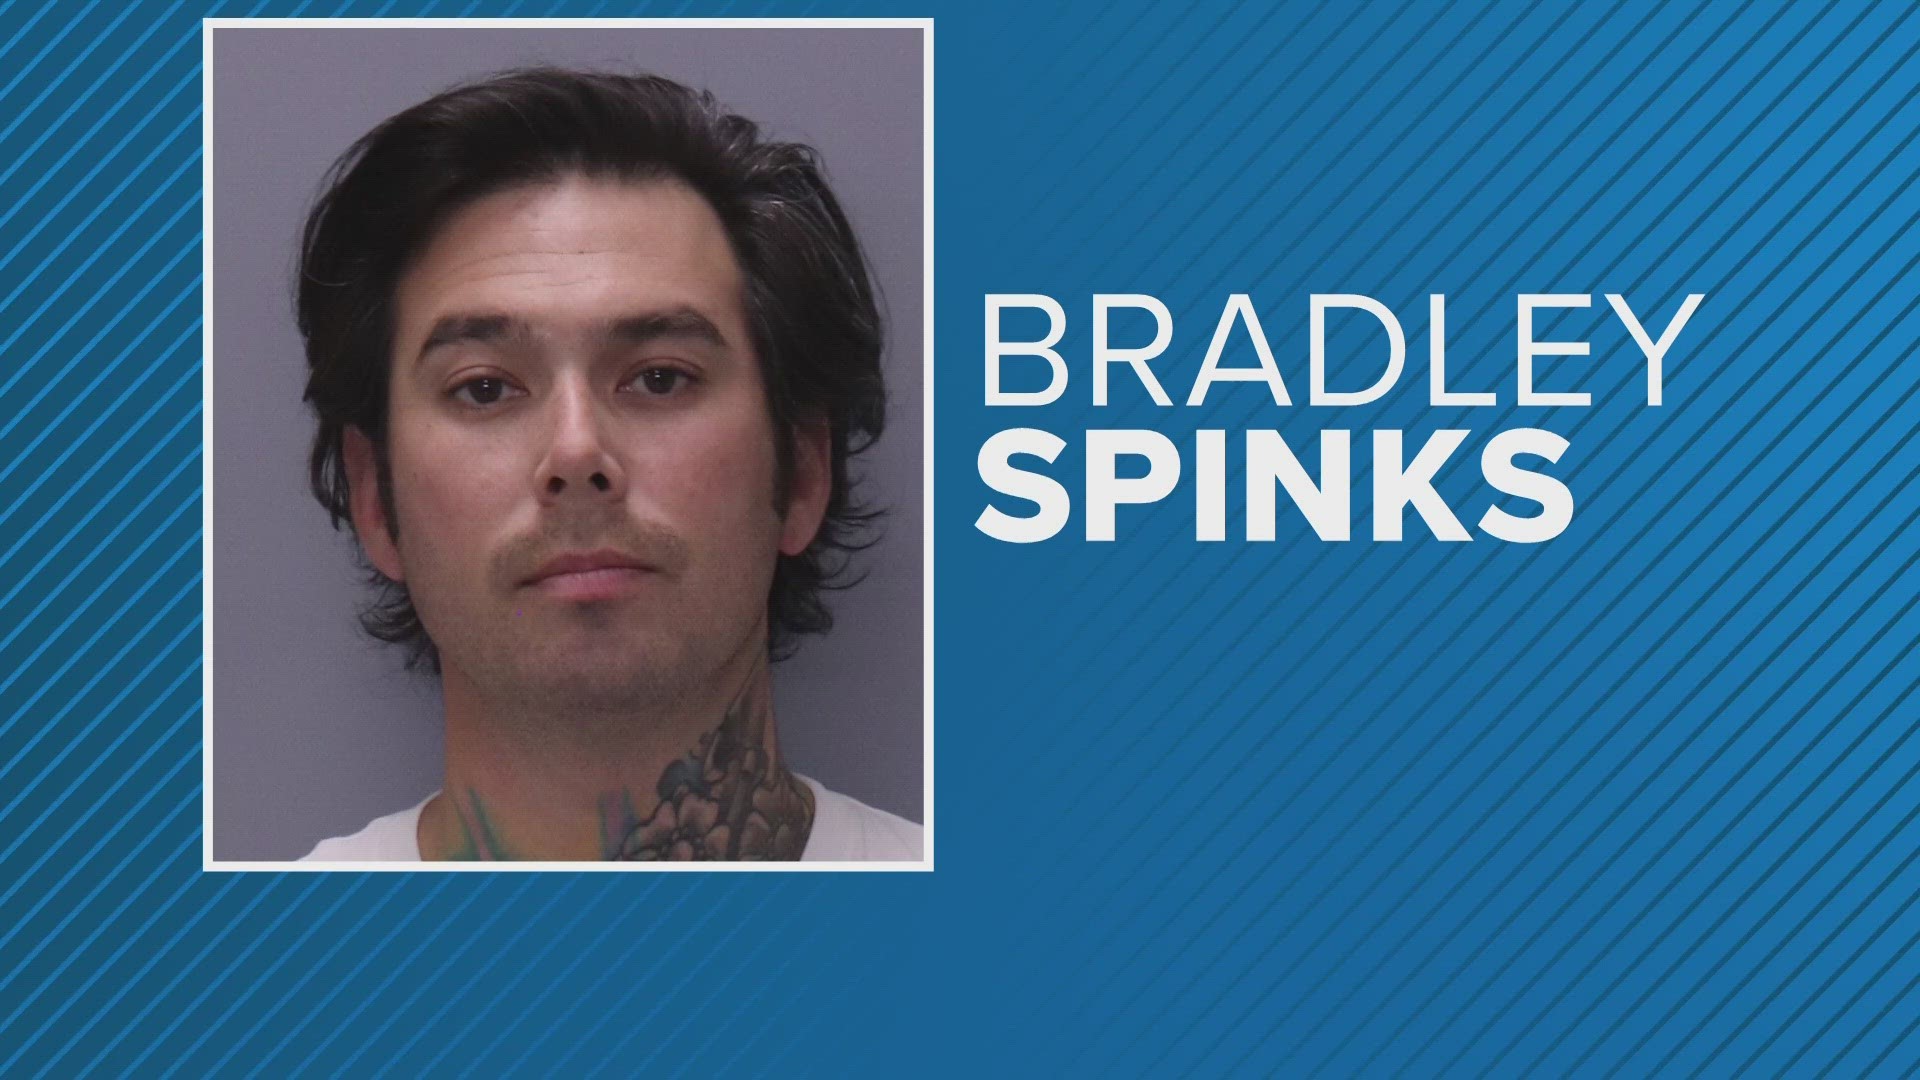 Florida man arrested for watching woman from camera inside home firstcoastnews pic